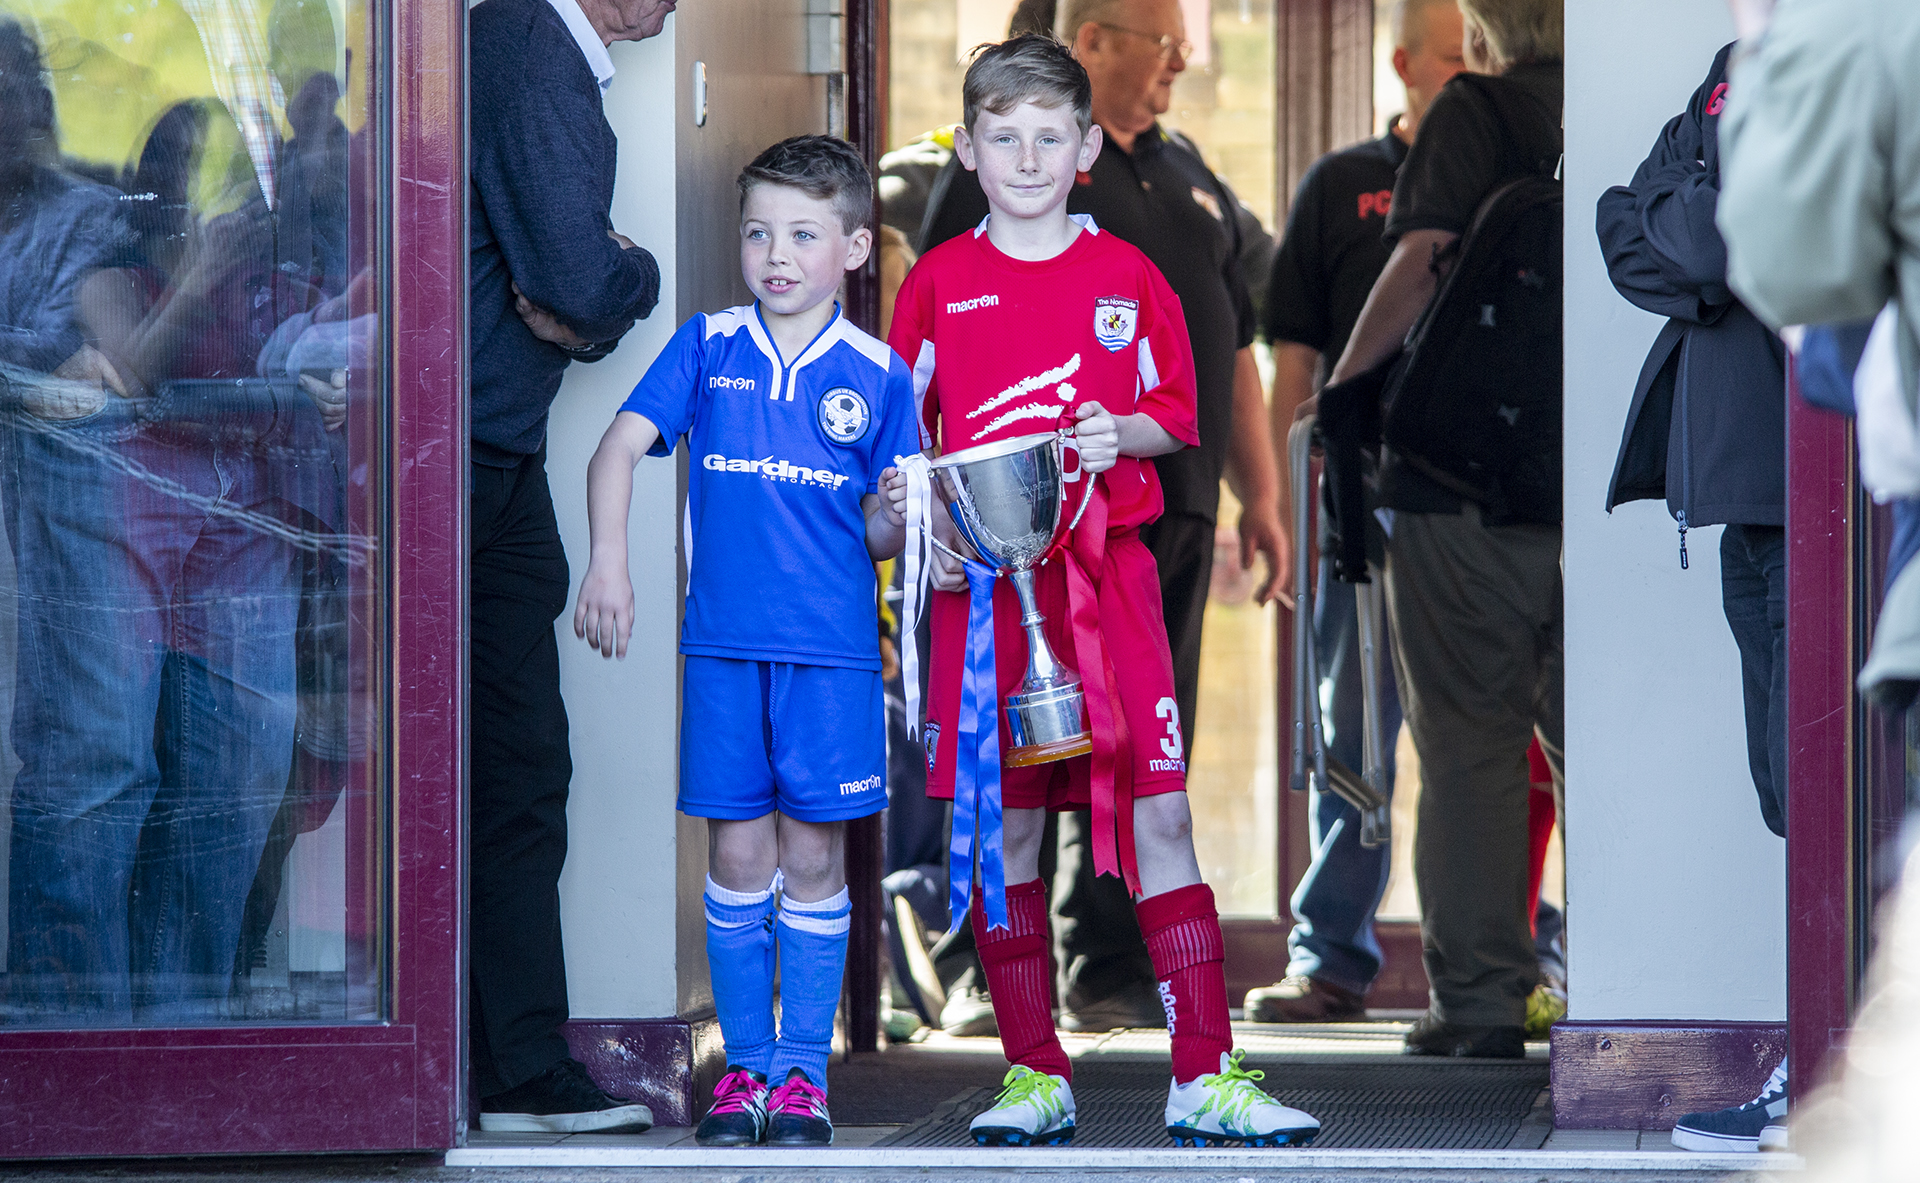 Airbus and Nomads mascots prepare to present the trophy ahead of kickoff | © NCM Media